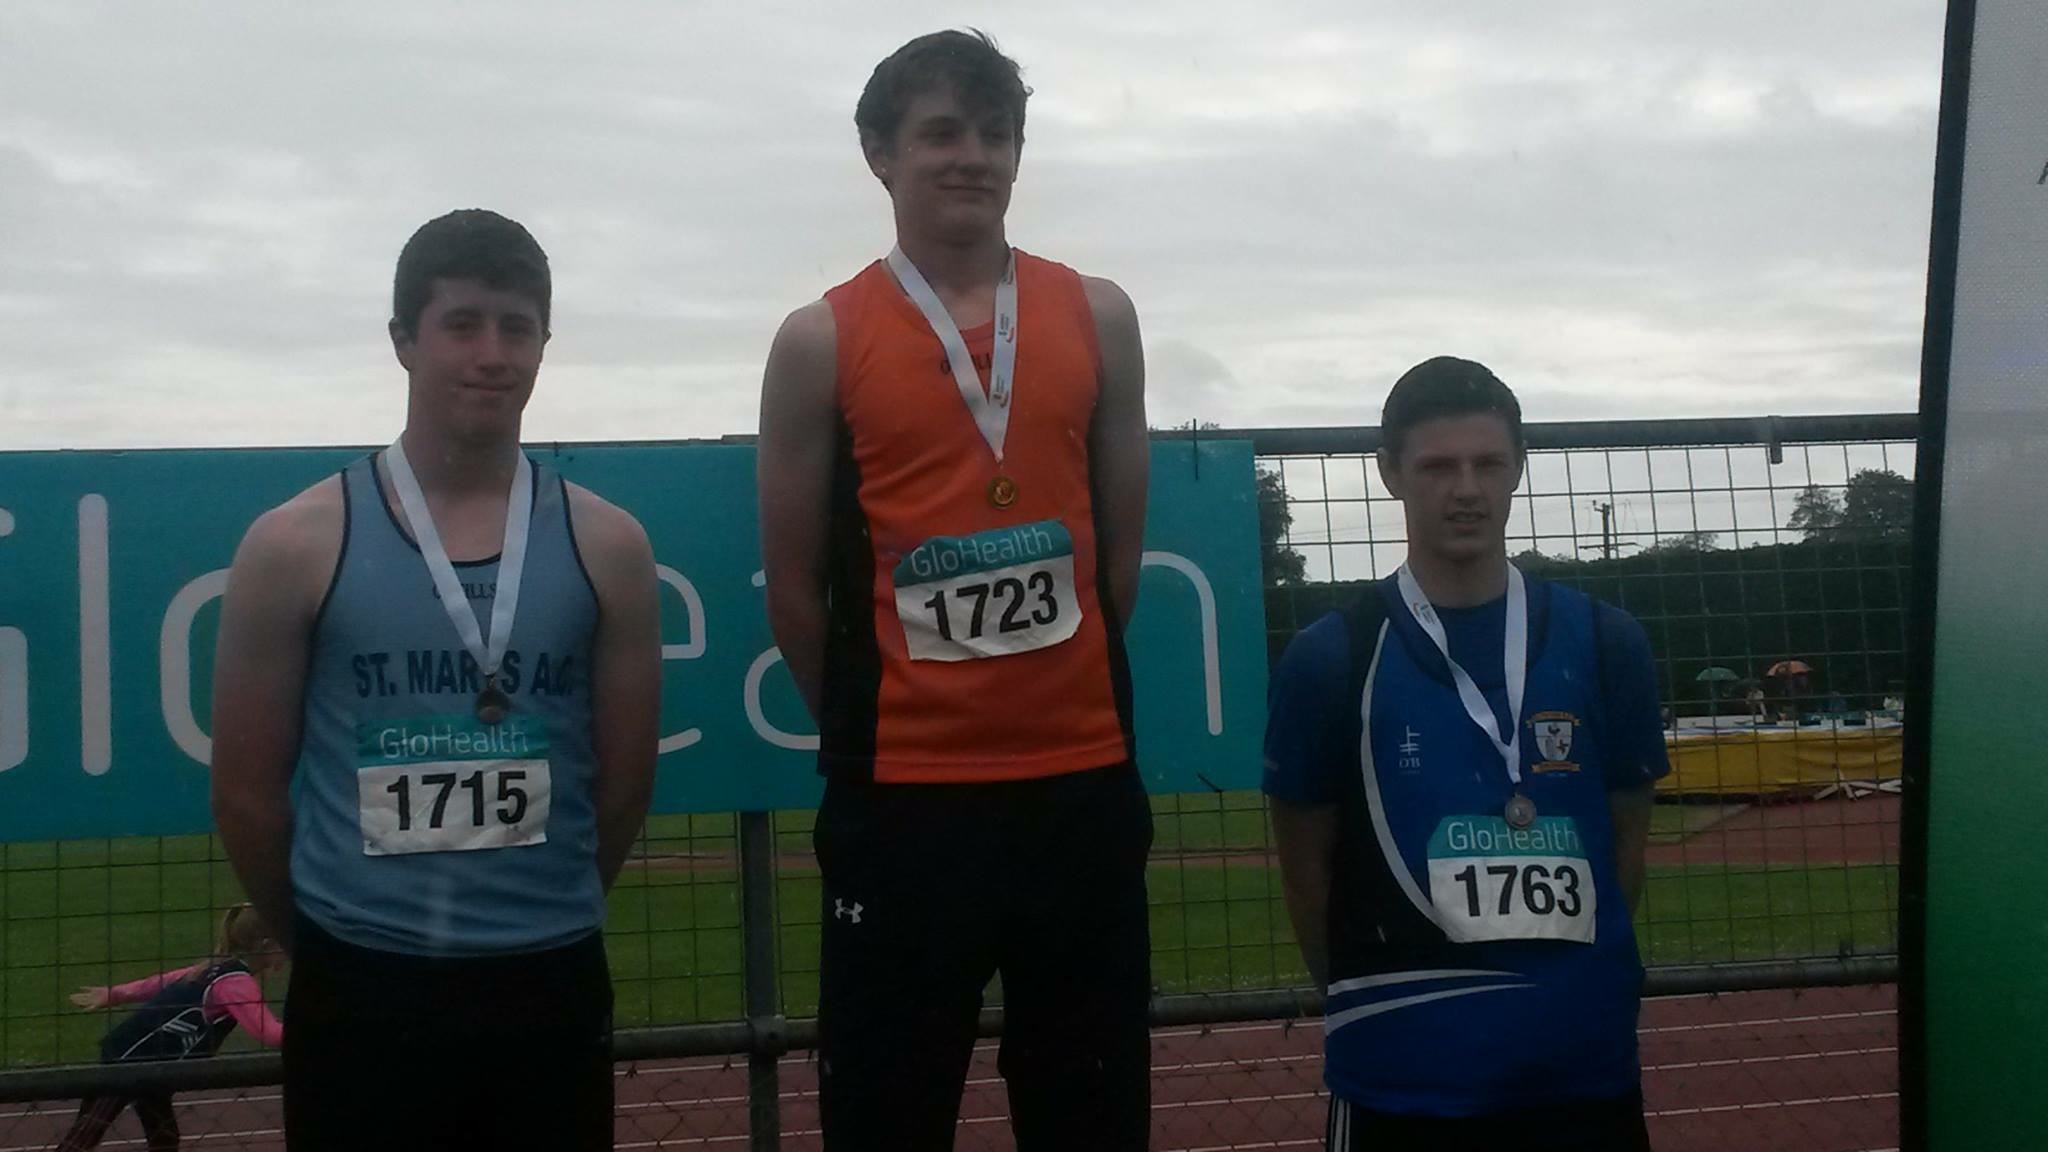 Gabriel Bell (on the right) at Irish Juvenile Combined Events' Championships (Tullamore, June 2015)